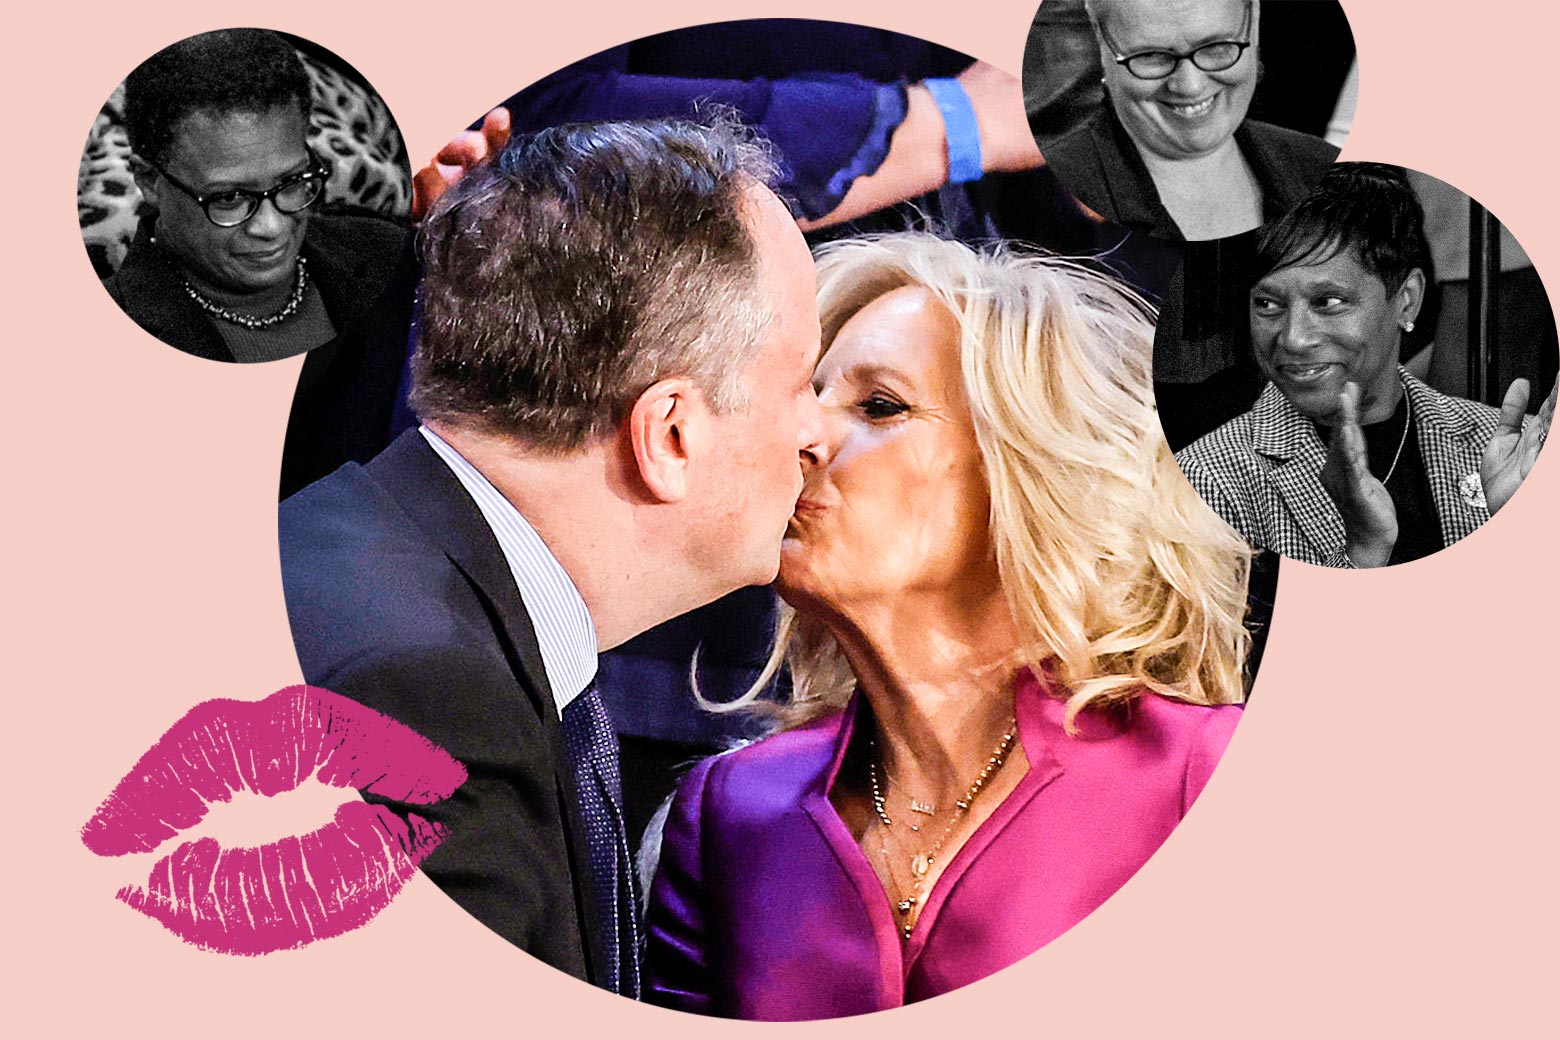 The Doug Emhoff–Jill Biden kiss lets be honest about what happened.